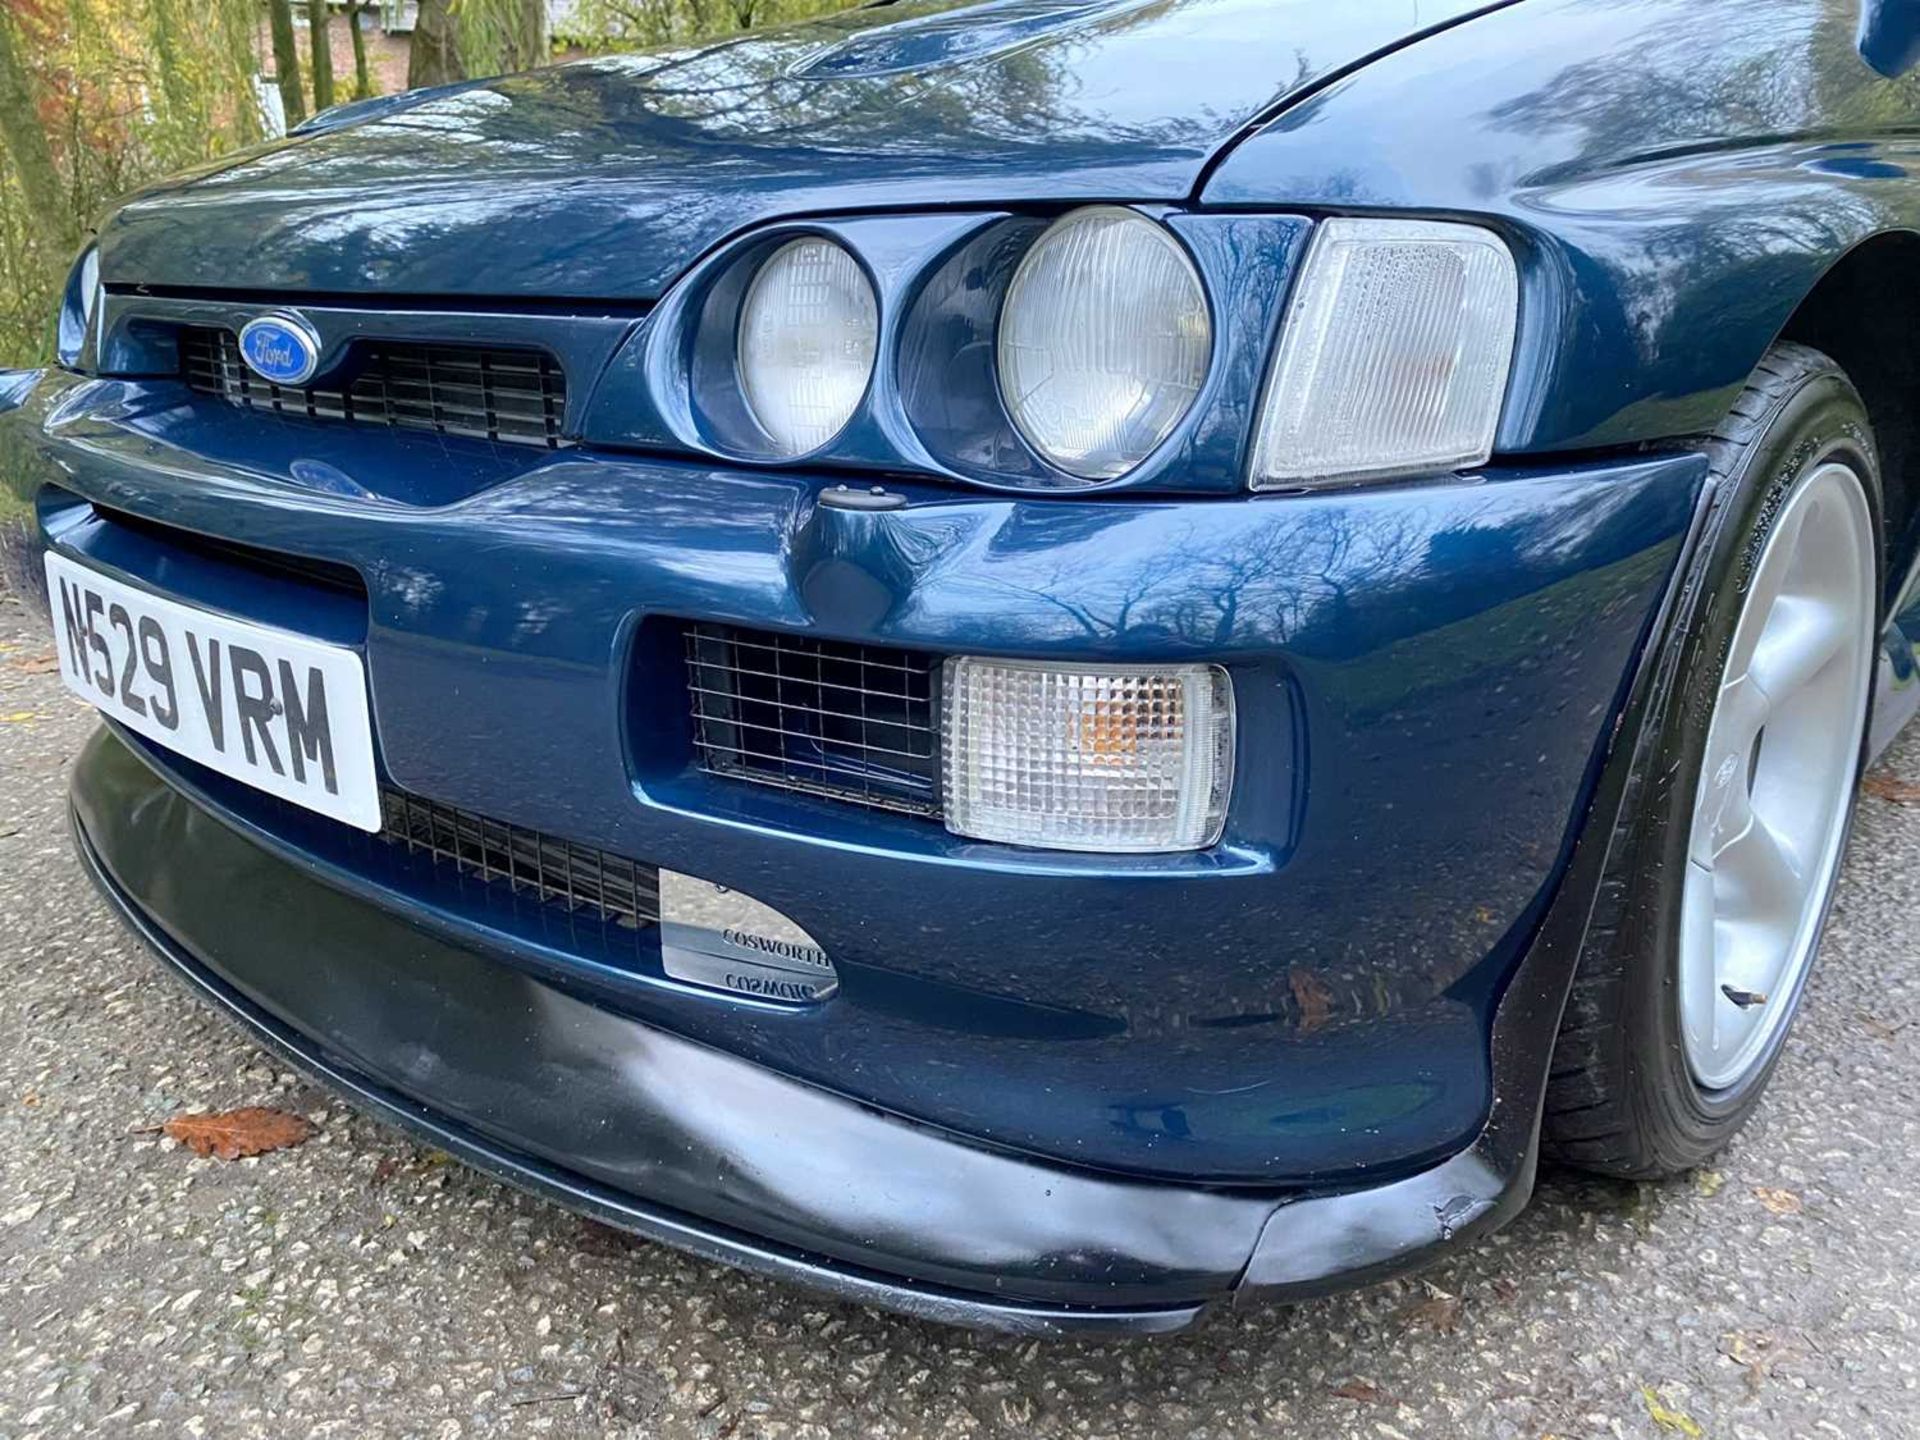 1995 Ford Escort RS Cosworth LUX Only 56,000 miles, finished in rare Petrol Blue - Image 90 of 98